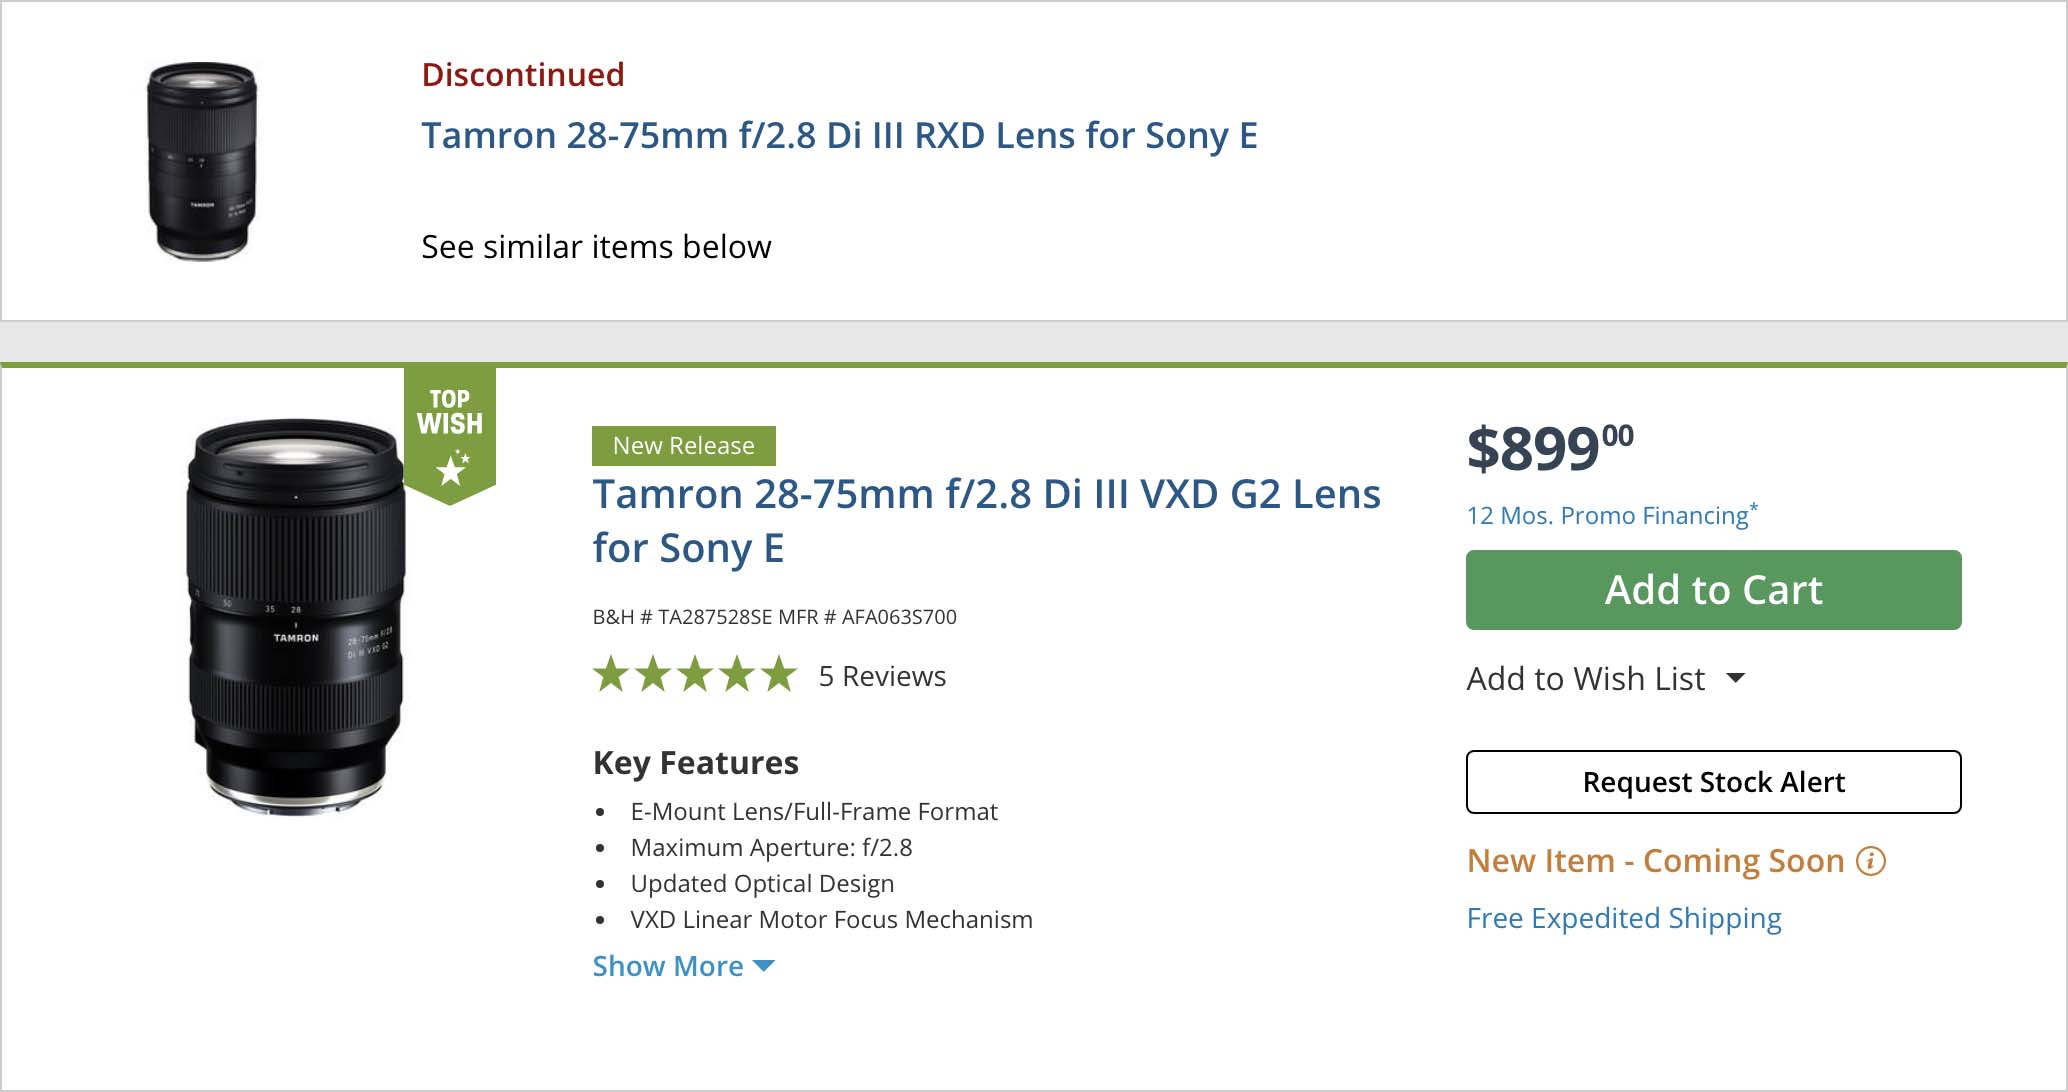 Tamron 28-75mm f/2.8 Di III RXD review